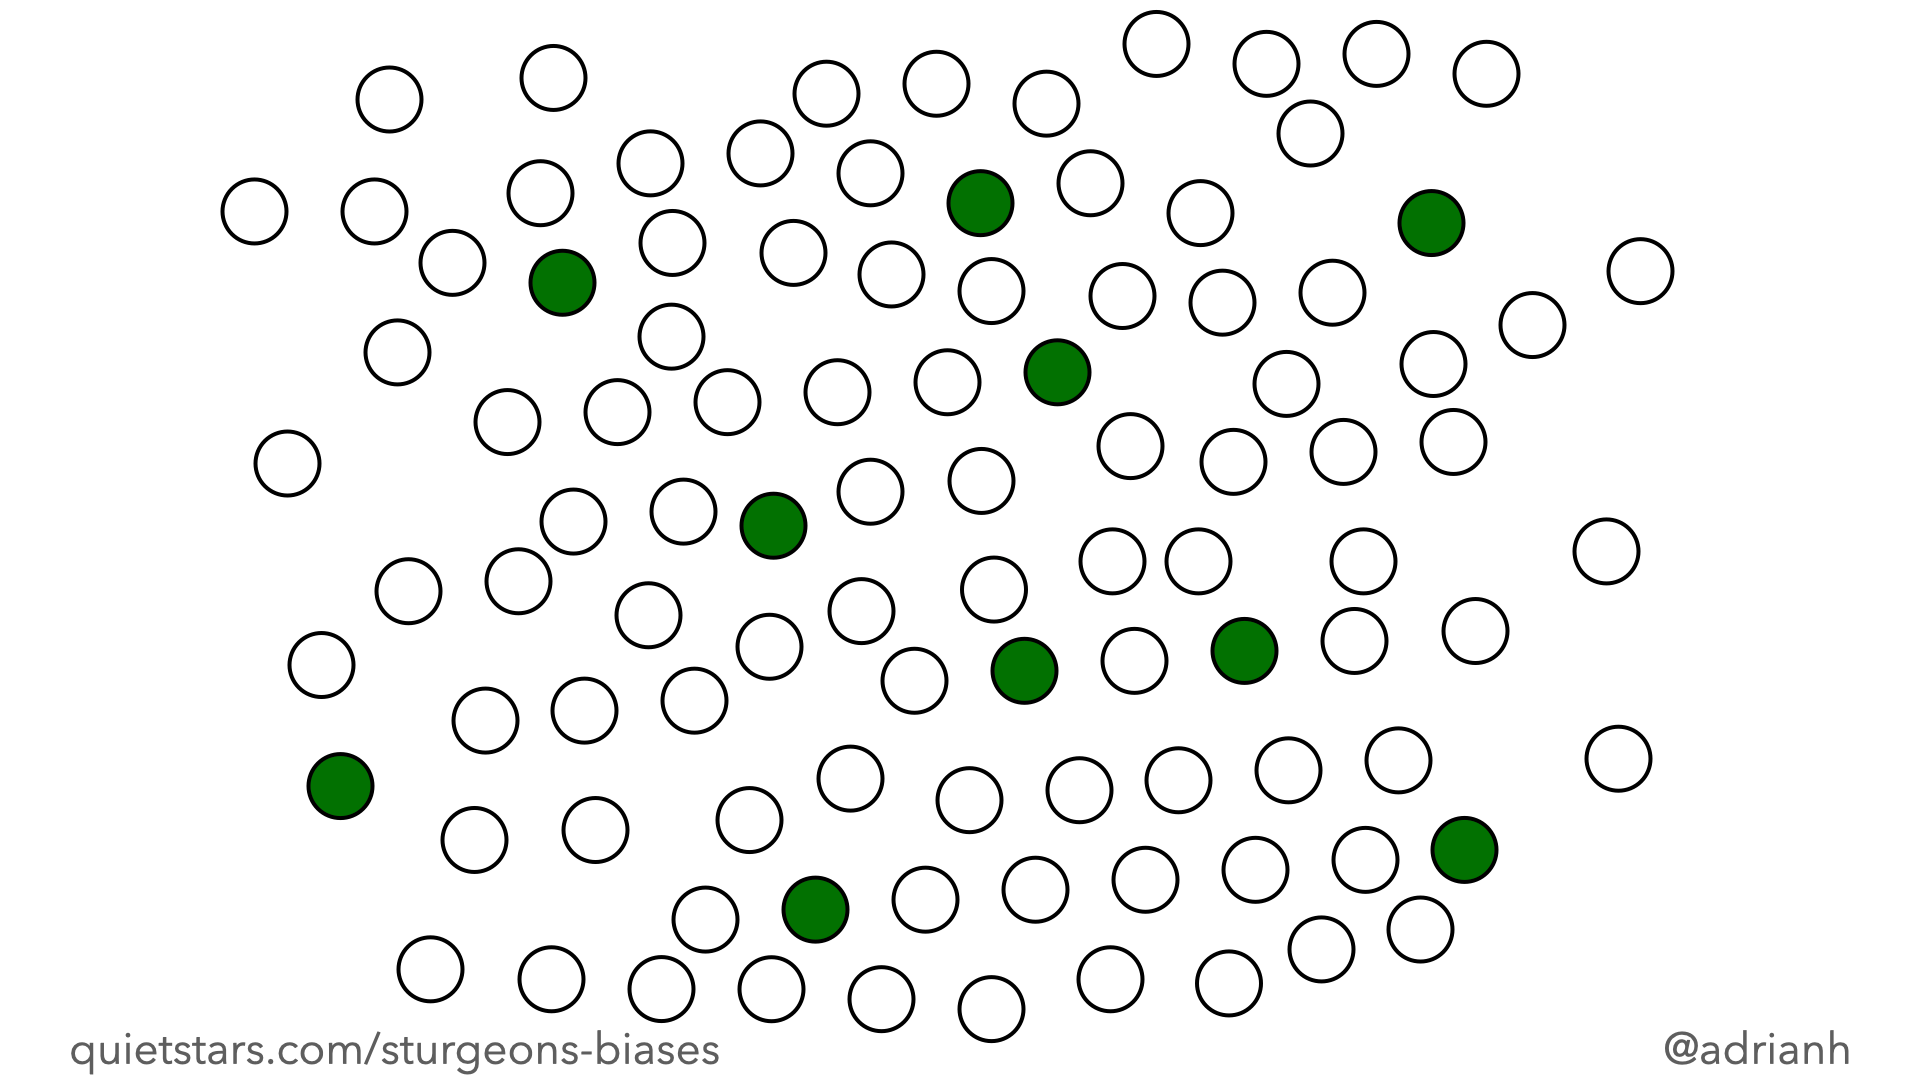 One hundred circles randomly spread. Ninety of them are white and ten are green. The green circles are spread evenly among the white.